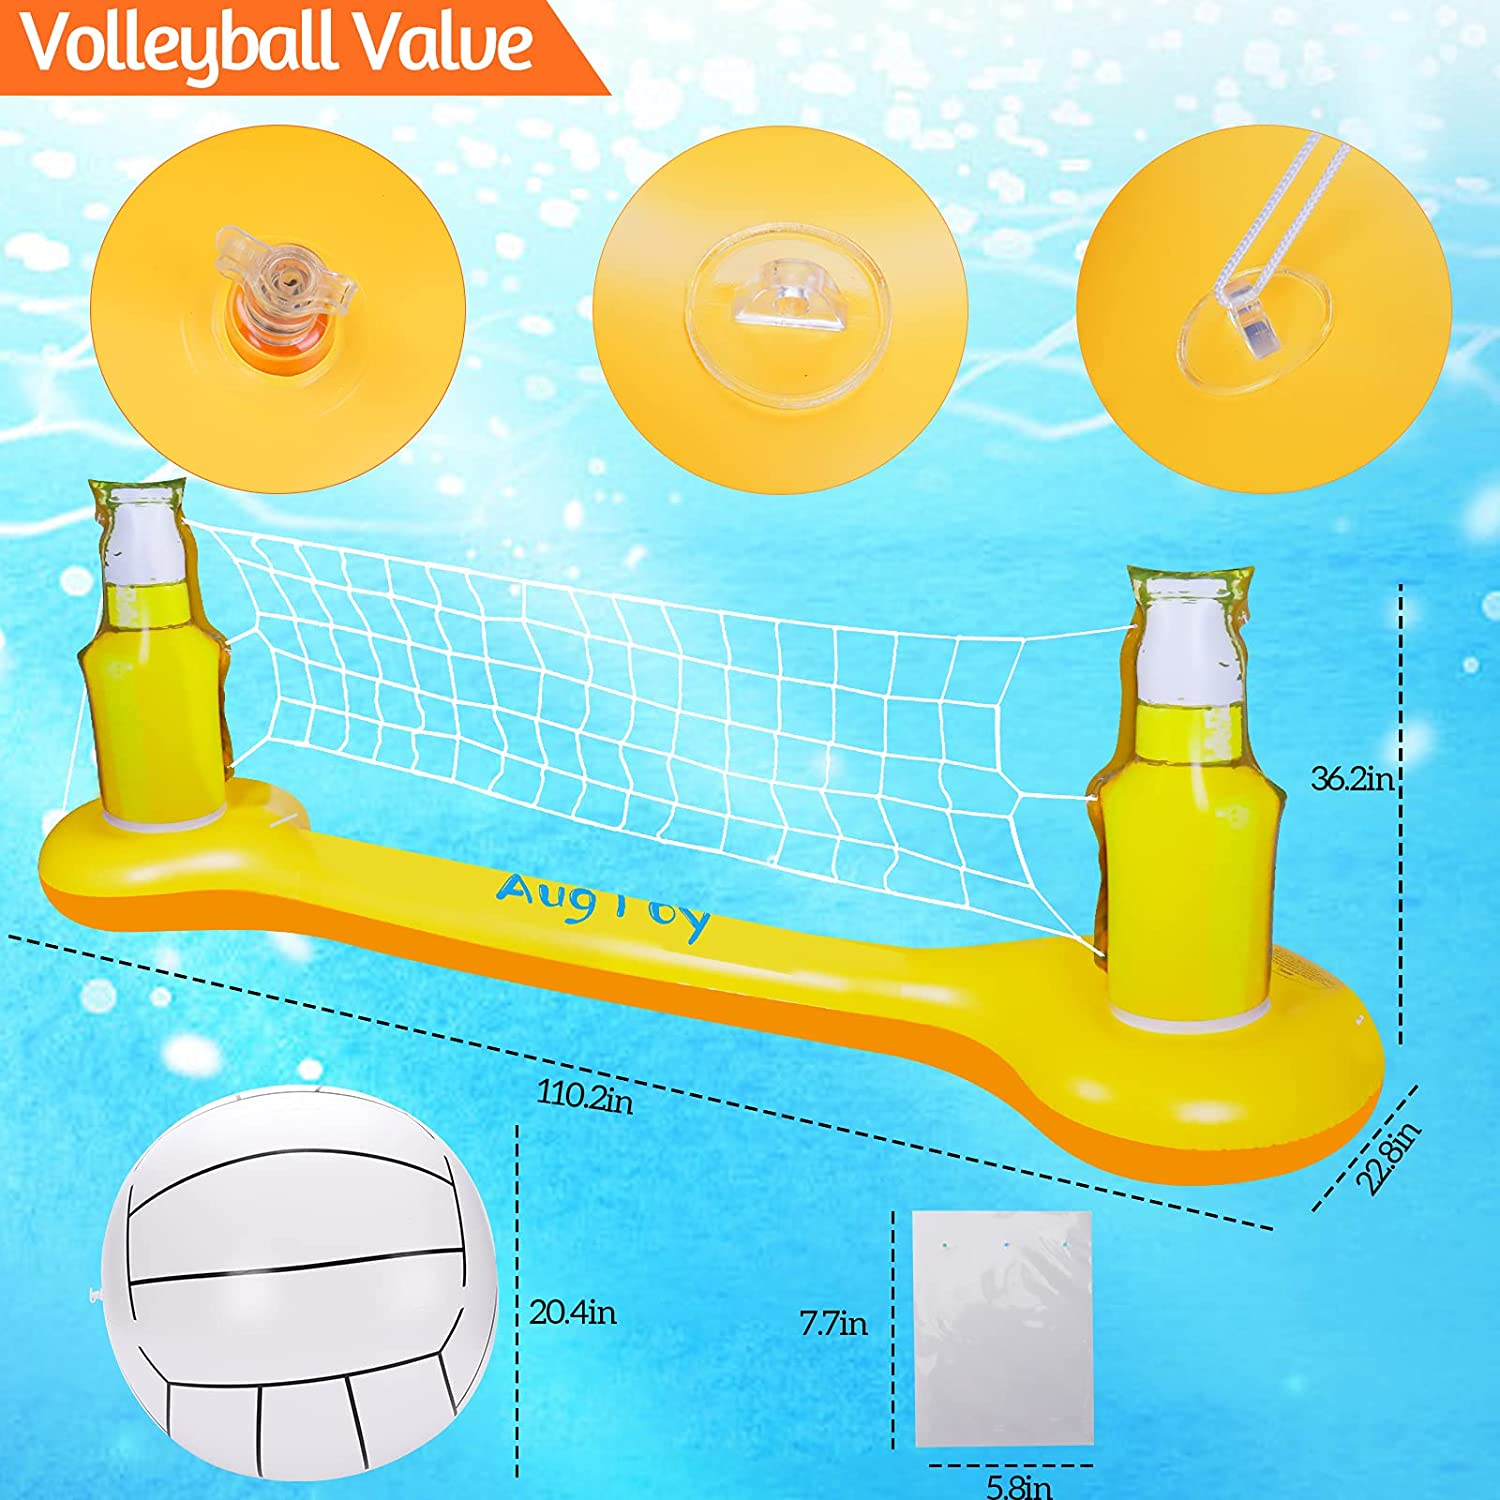 Pool Volleyball Set, Pool Games for Adults and Family Kids, Pool Toys for Teens, Inflatable Swimming Pool Floats Accessories Summer Outdoor outside Pool Party Games Volleyball Court (108"×20"×33")